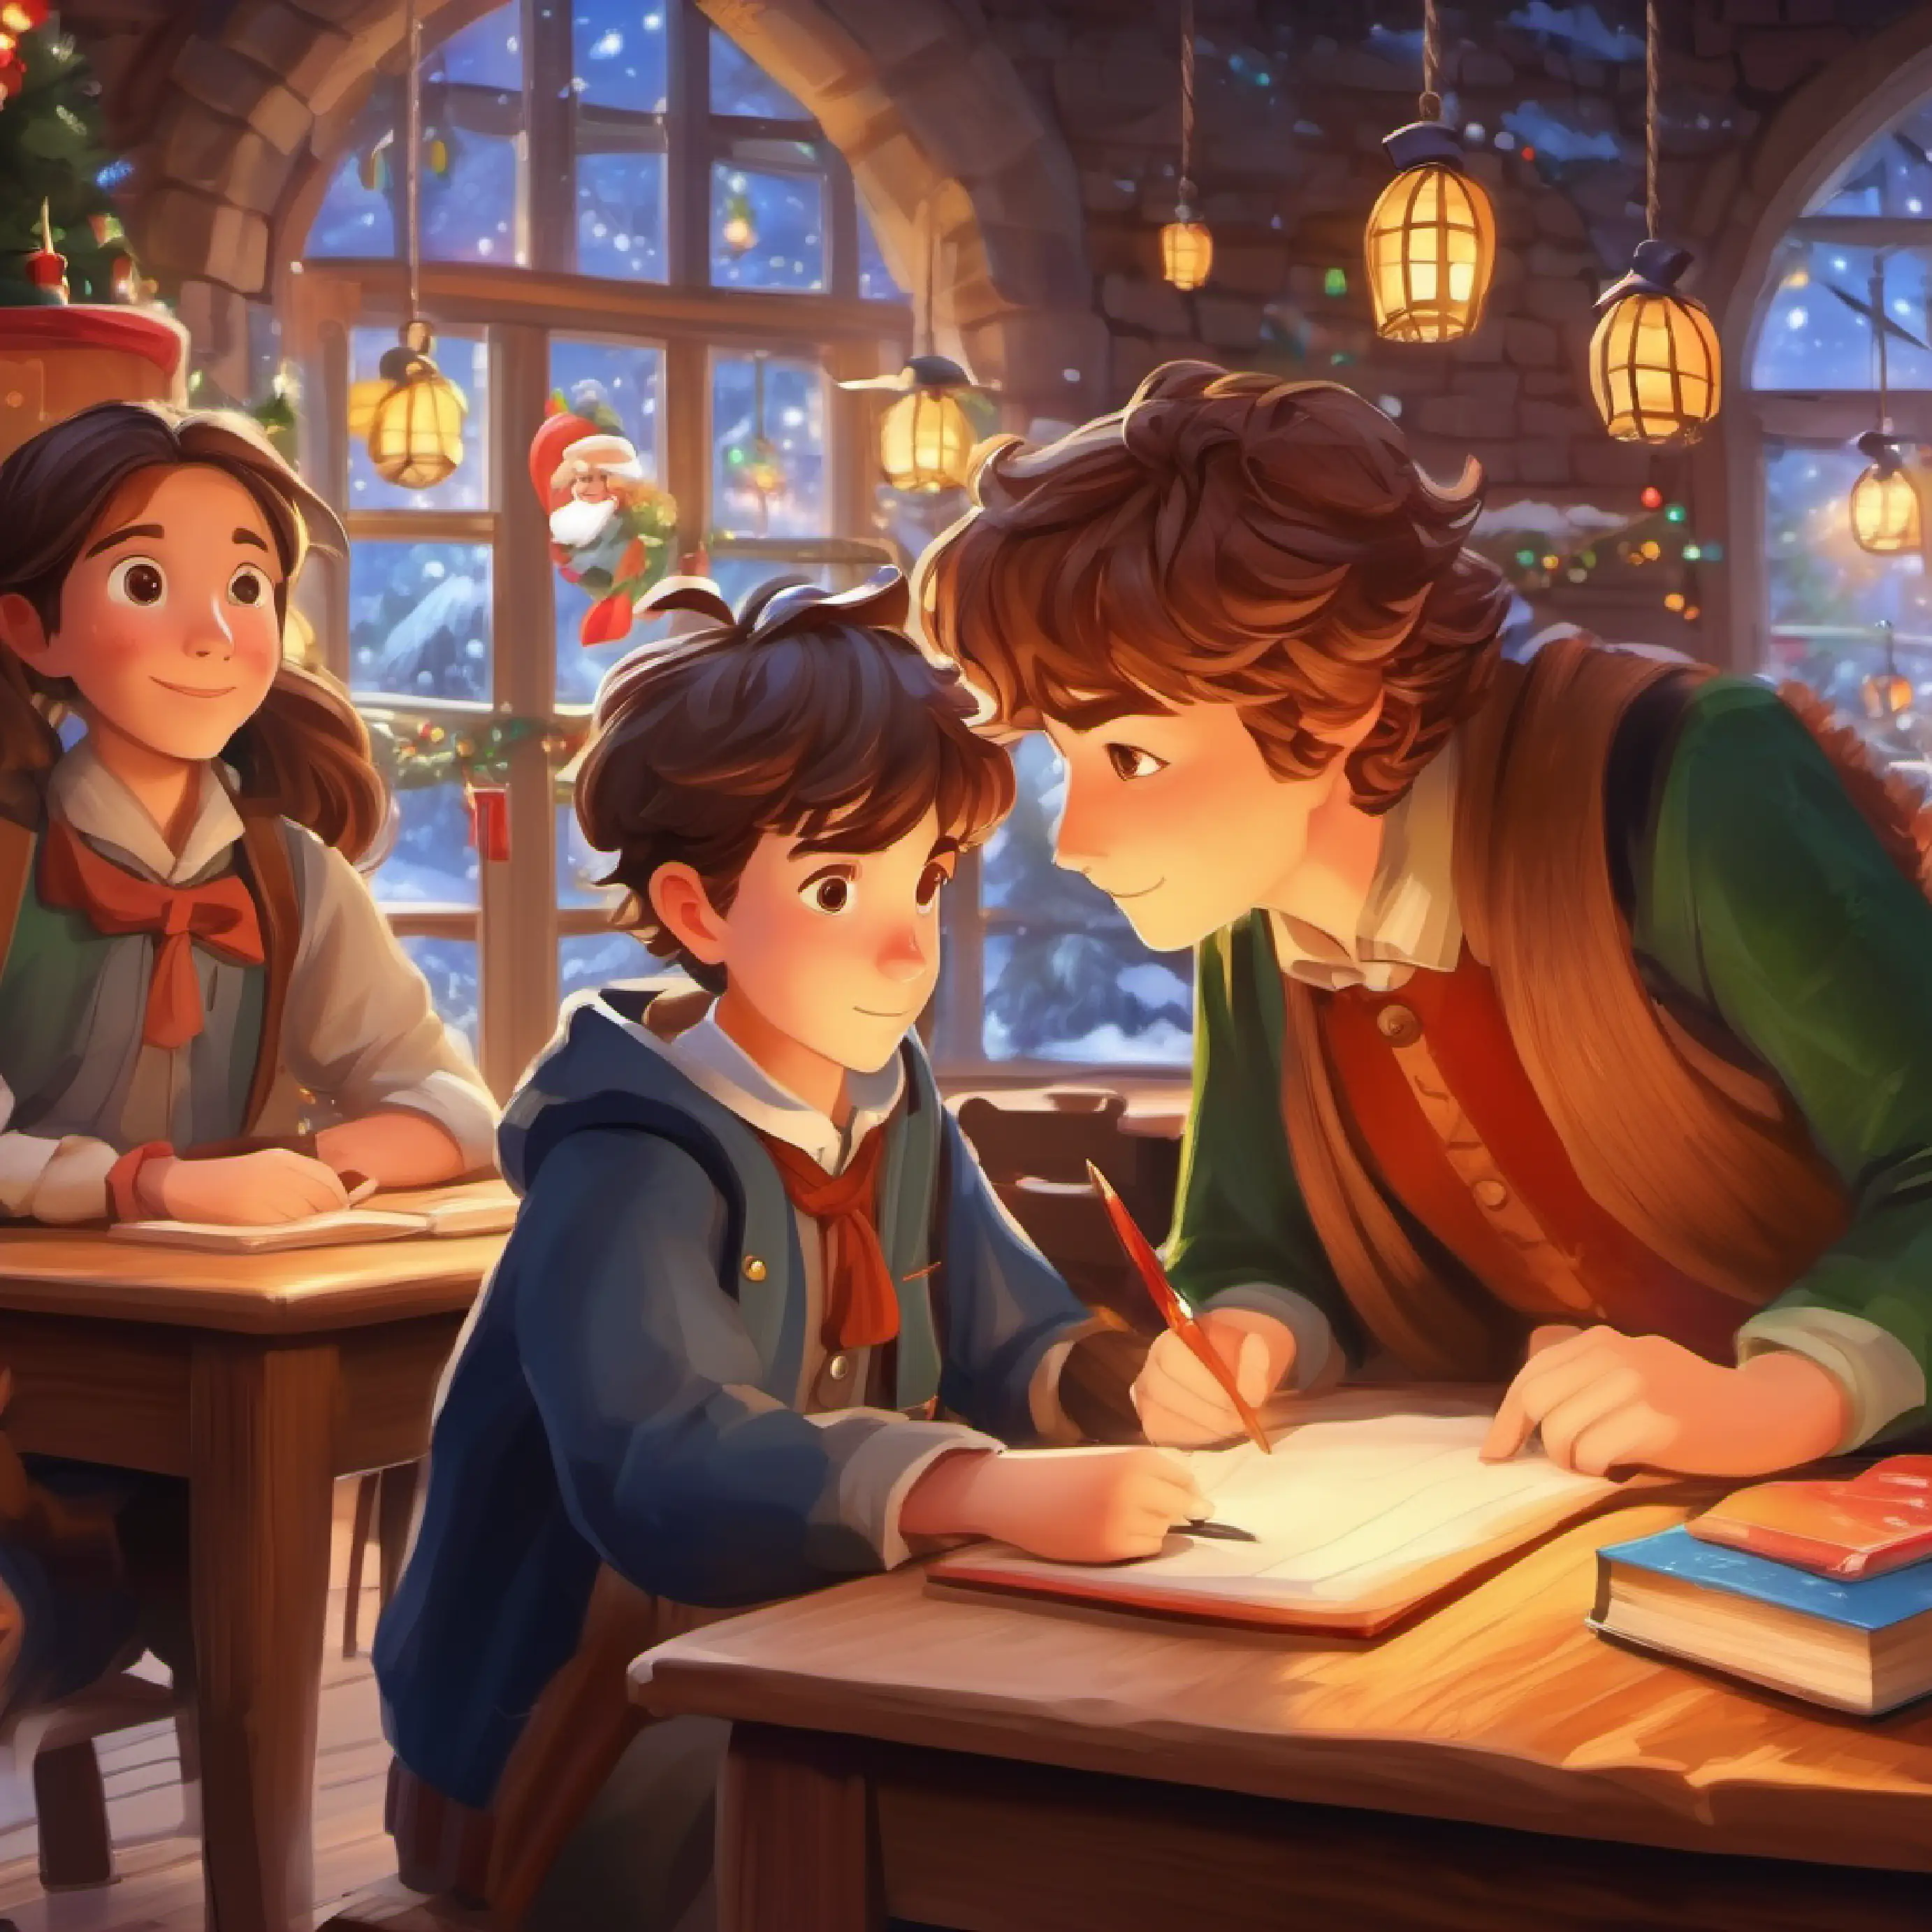 Introducing the village and A spry boy with amber eyes and untamed chestnut hair's character, a classroom setting.